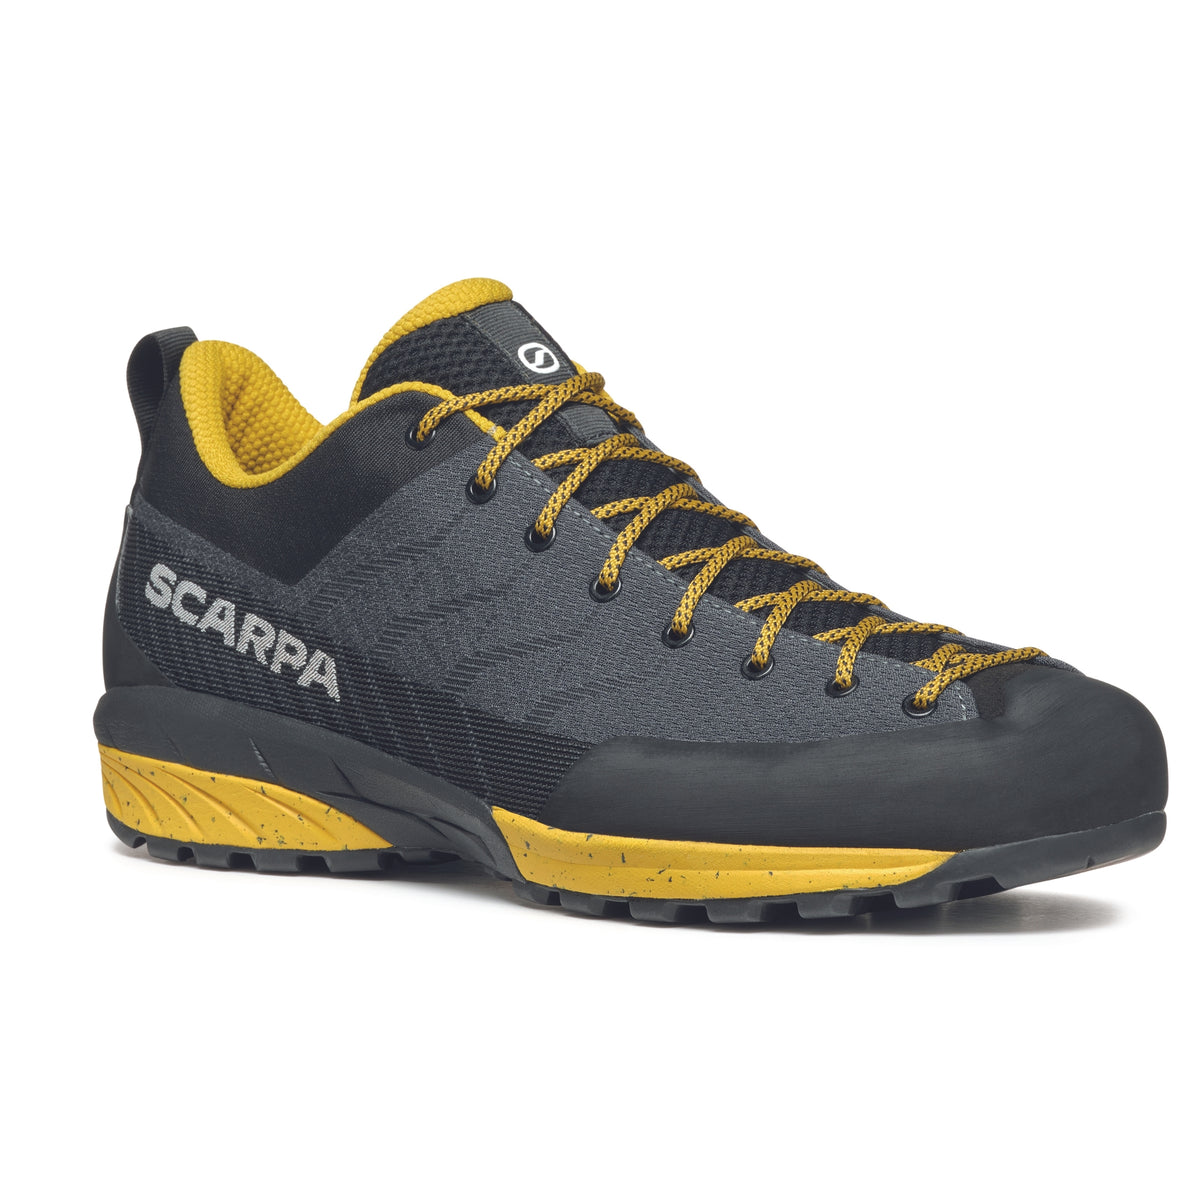 Scarpa Mescalito Planet approach shoes in grey/curryScarpa Mescalito Planet approach shoes in grey/curry colour